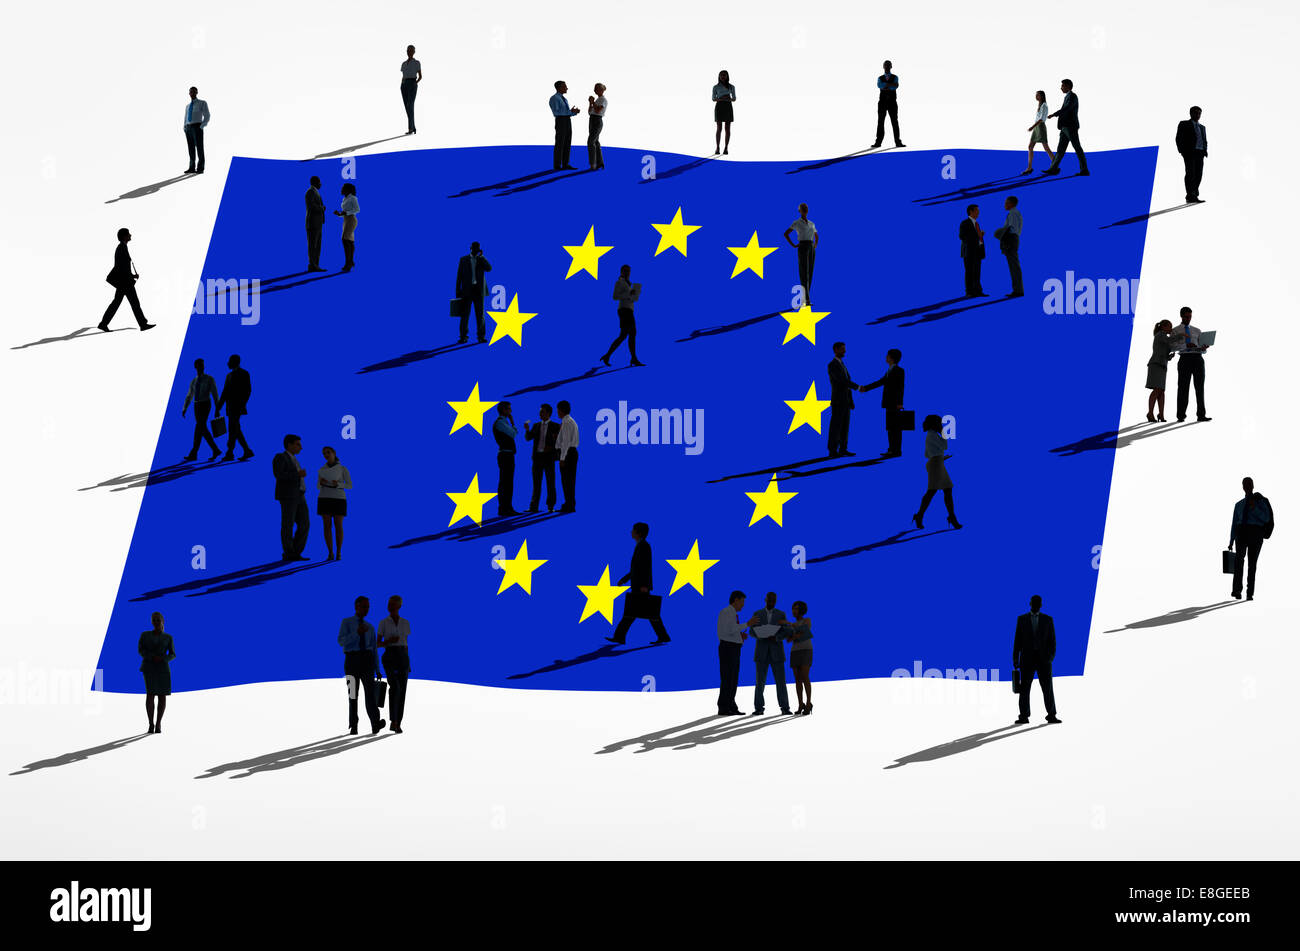 European union and a group of people. Stock Photo